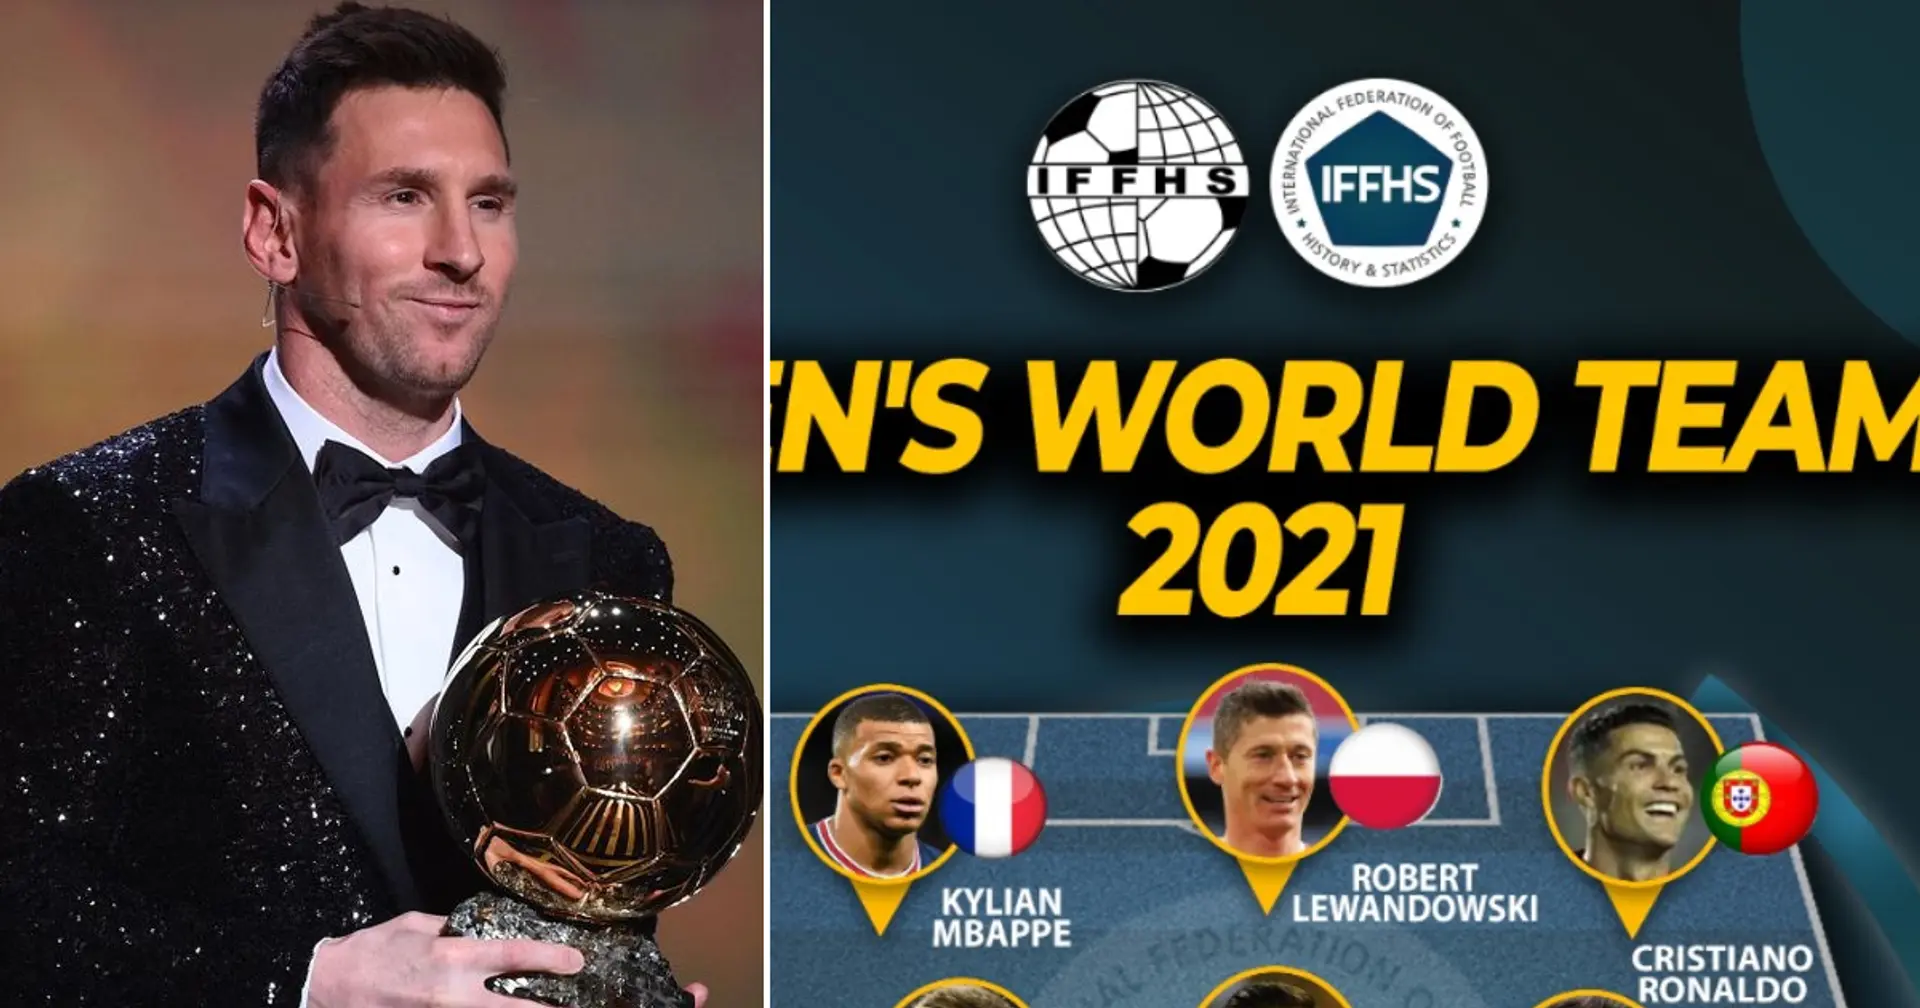 Lionel Messi makes IFFHS World Team of the Year as a midfielder